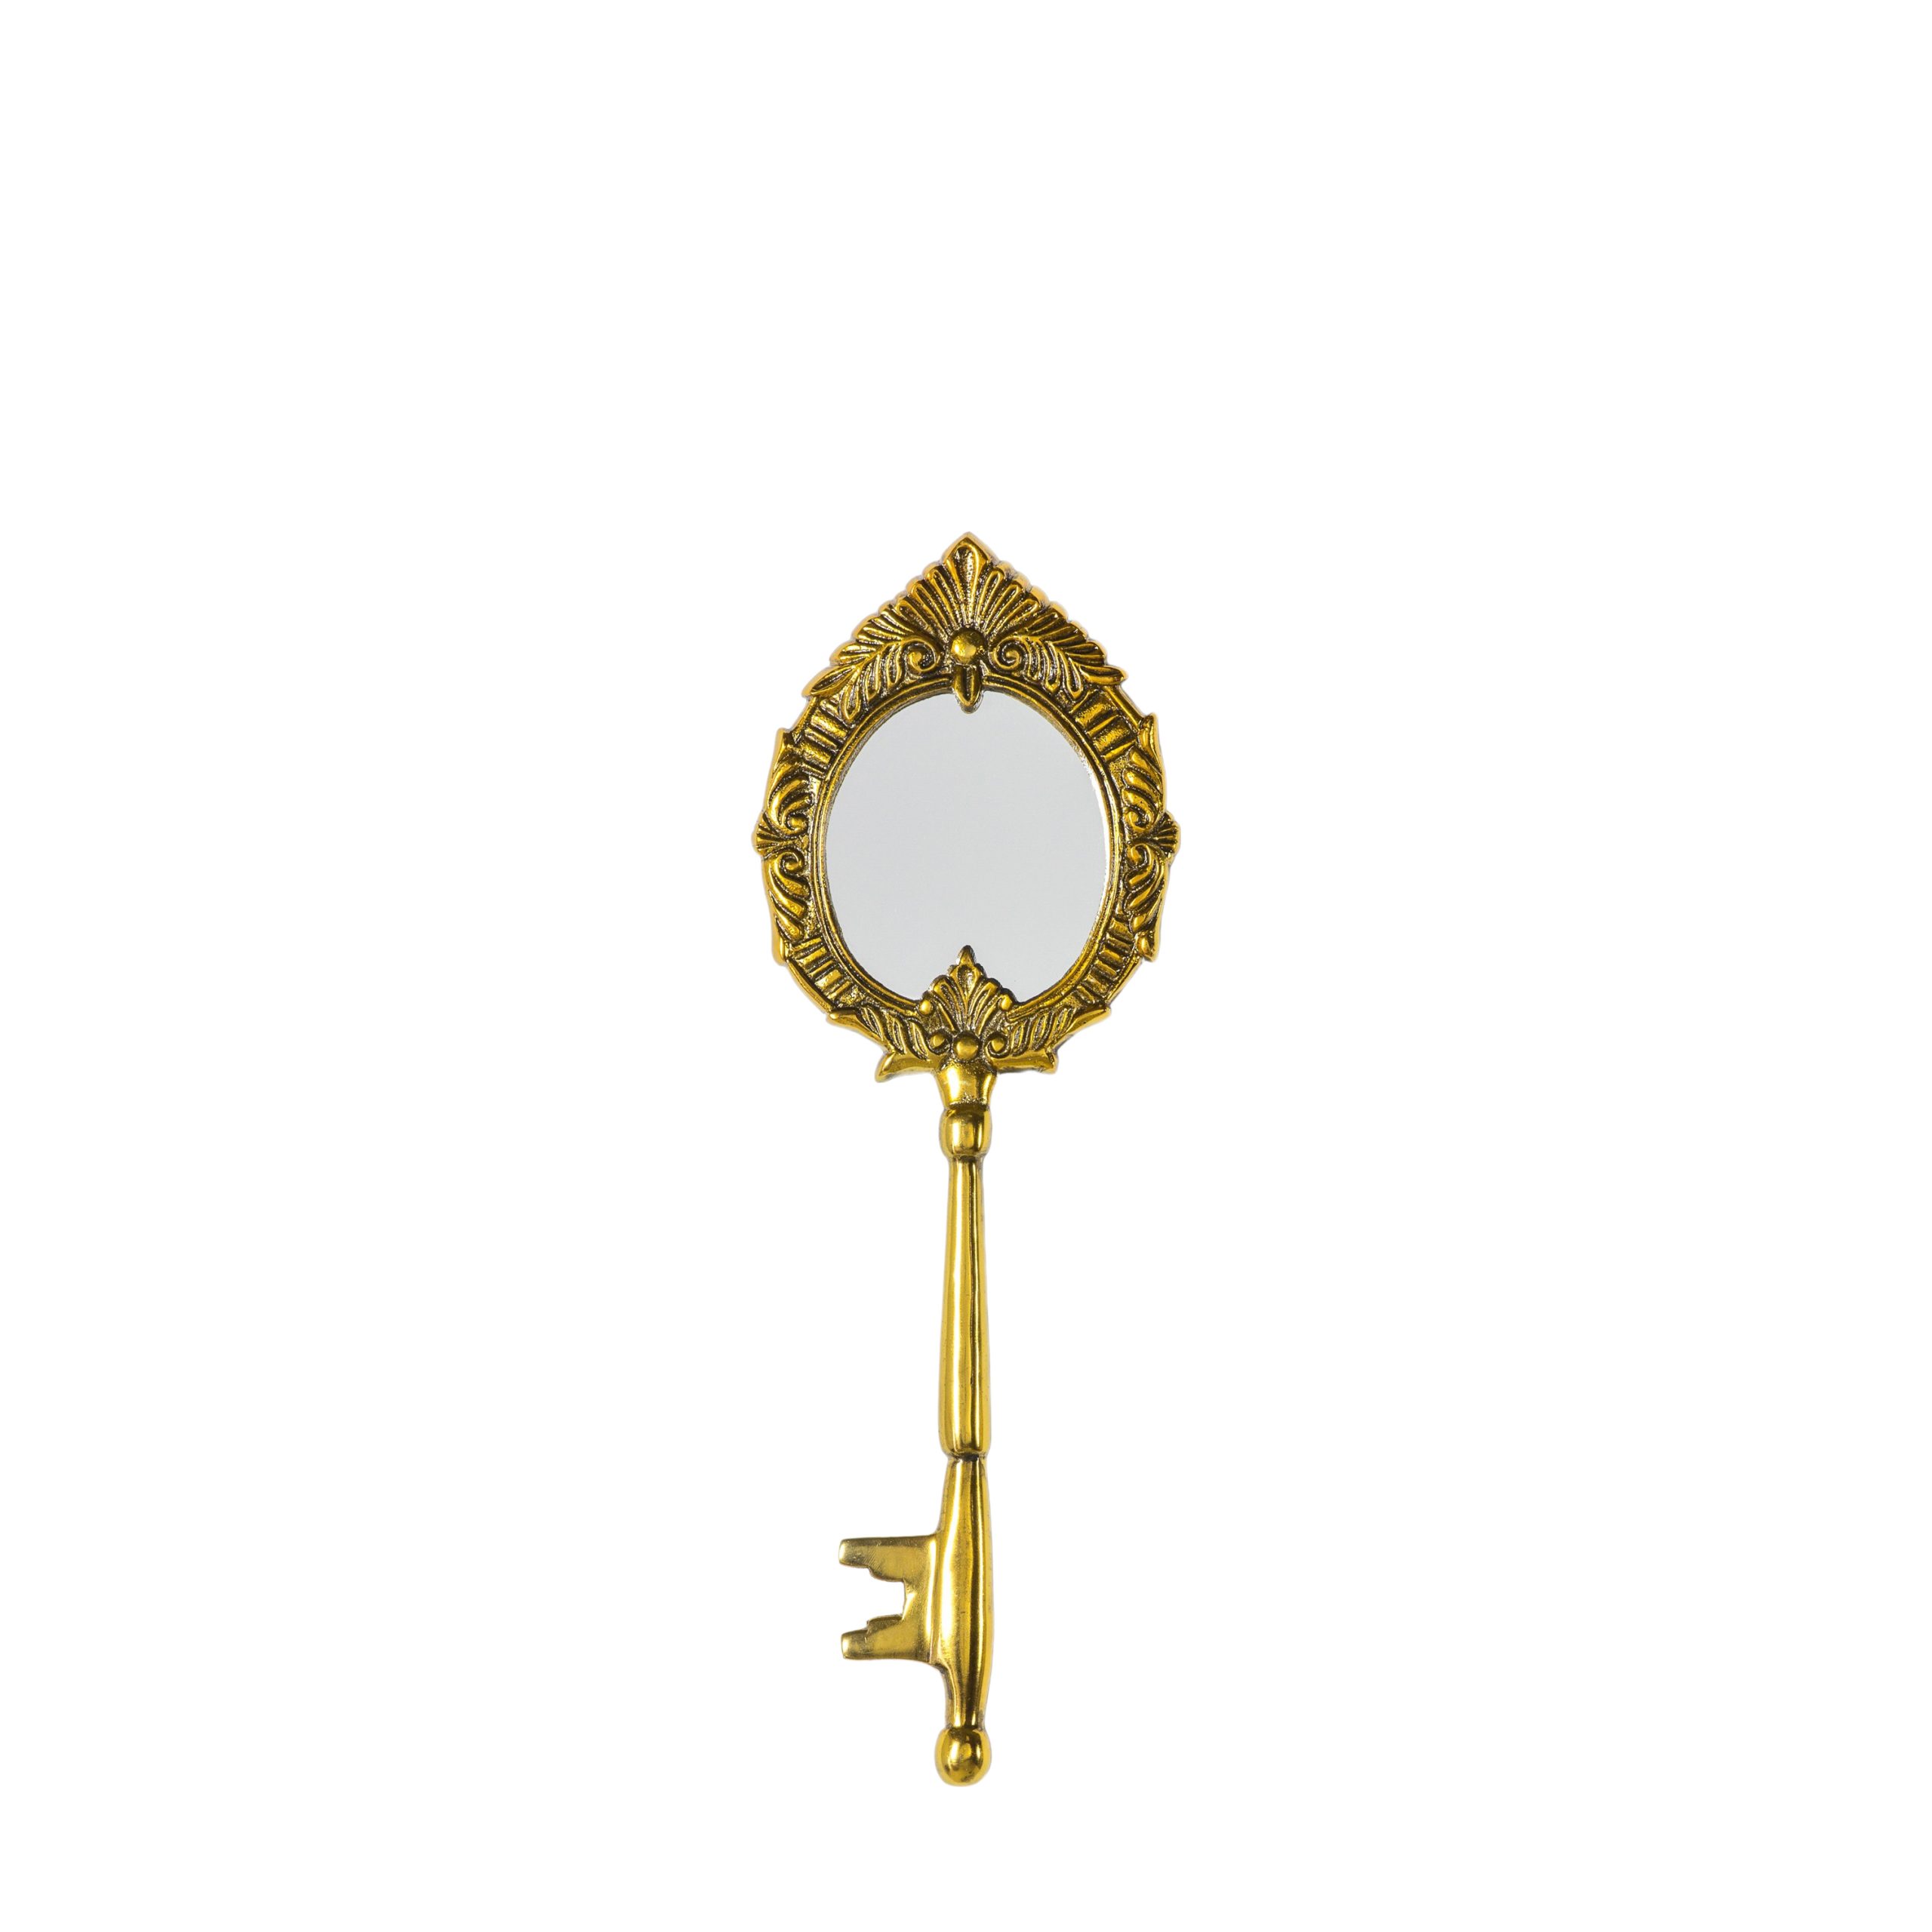 Gallery Direct Romea Mirror Brass Antique | Shackletons